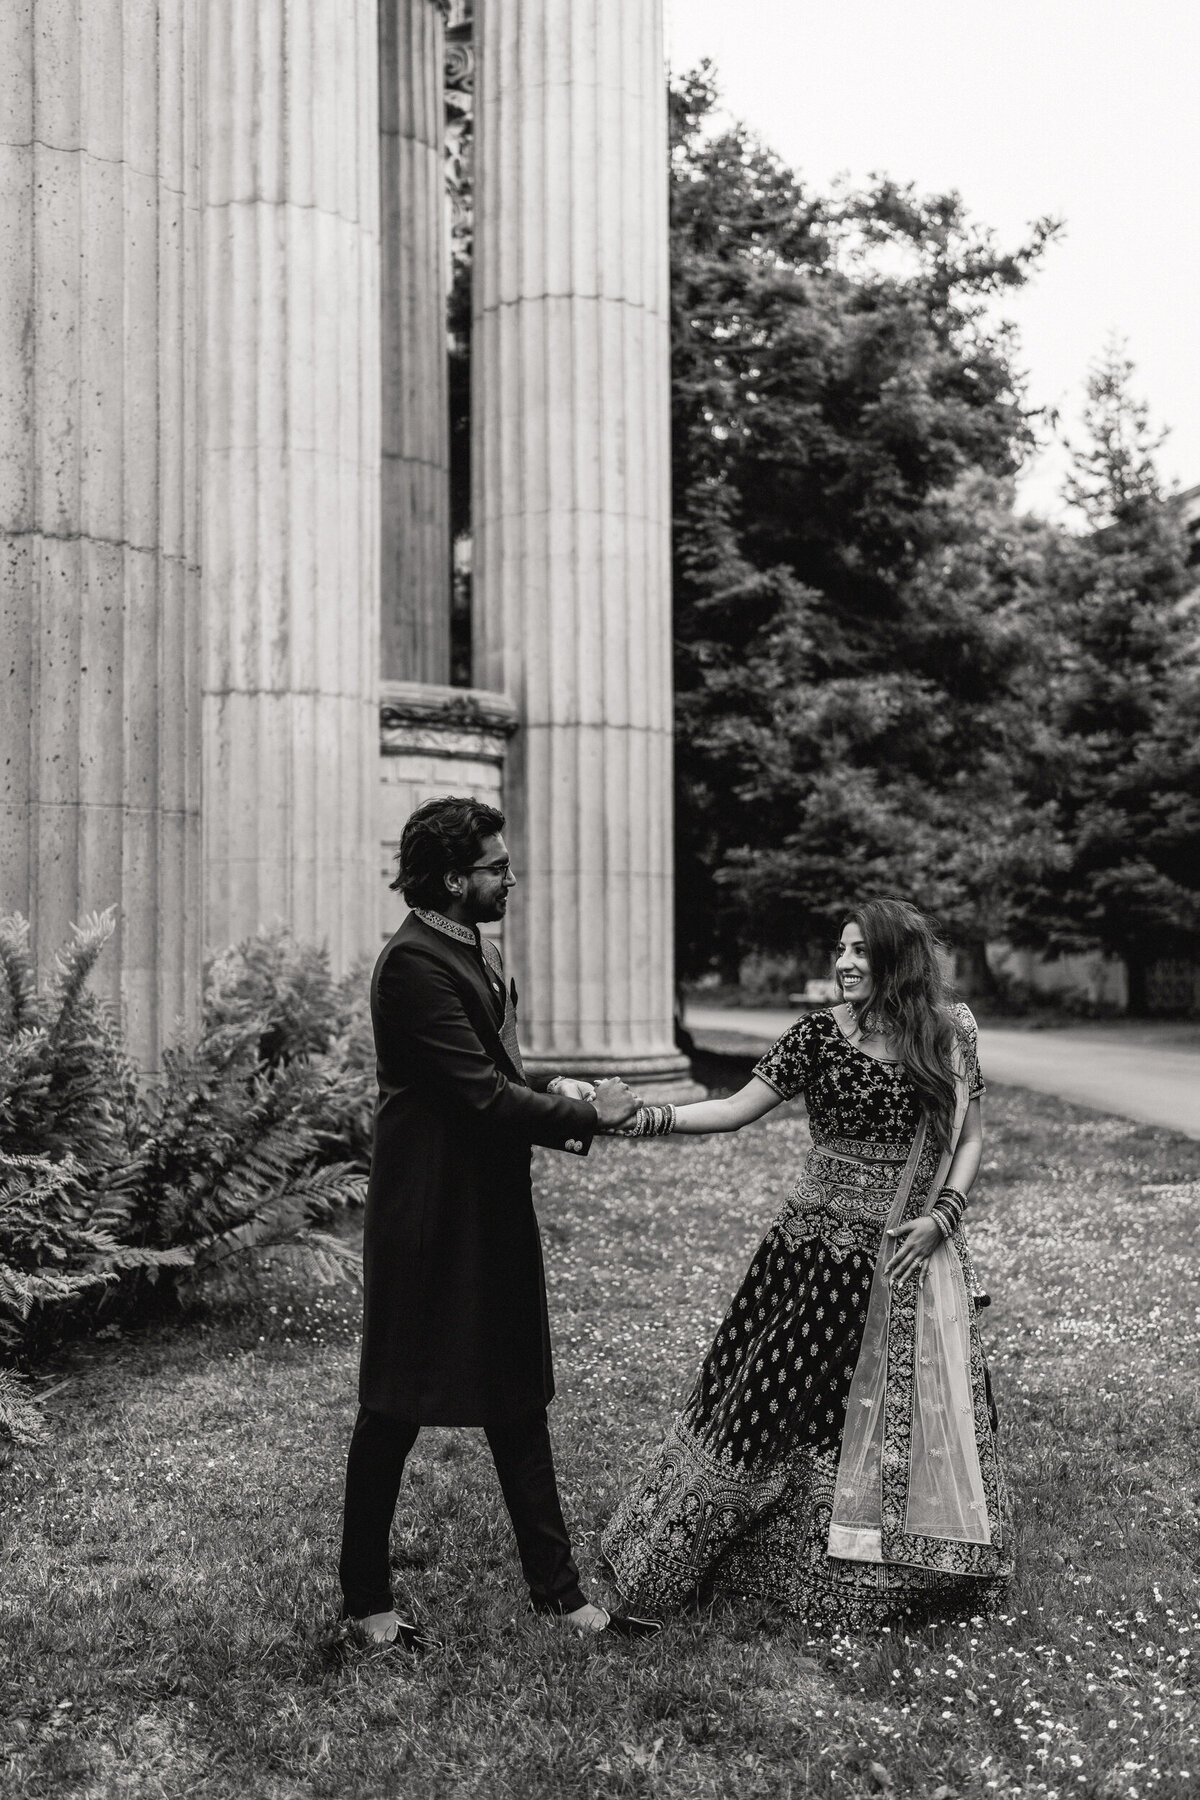 A black and white photograph of Heera and Nithin during their engagement portrait session at the Palace of Fine Arts in San Francisco, California. They are dressed in traditional clothing from India and are holding hands as they walk together. Heera is leading slightly and smiling as she looks back at Nithin. Wedding photographs by Stacie McChesney/Vitae Weddings.